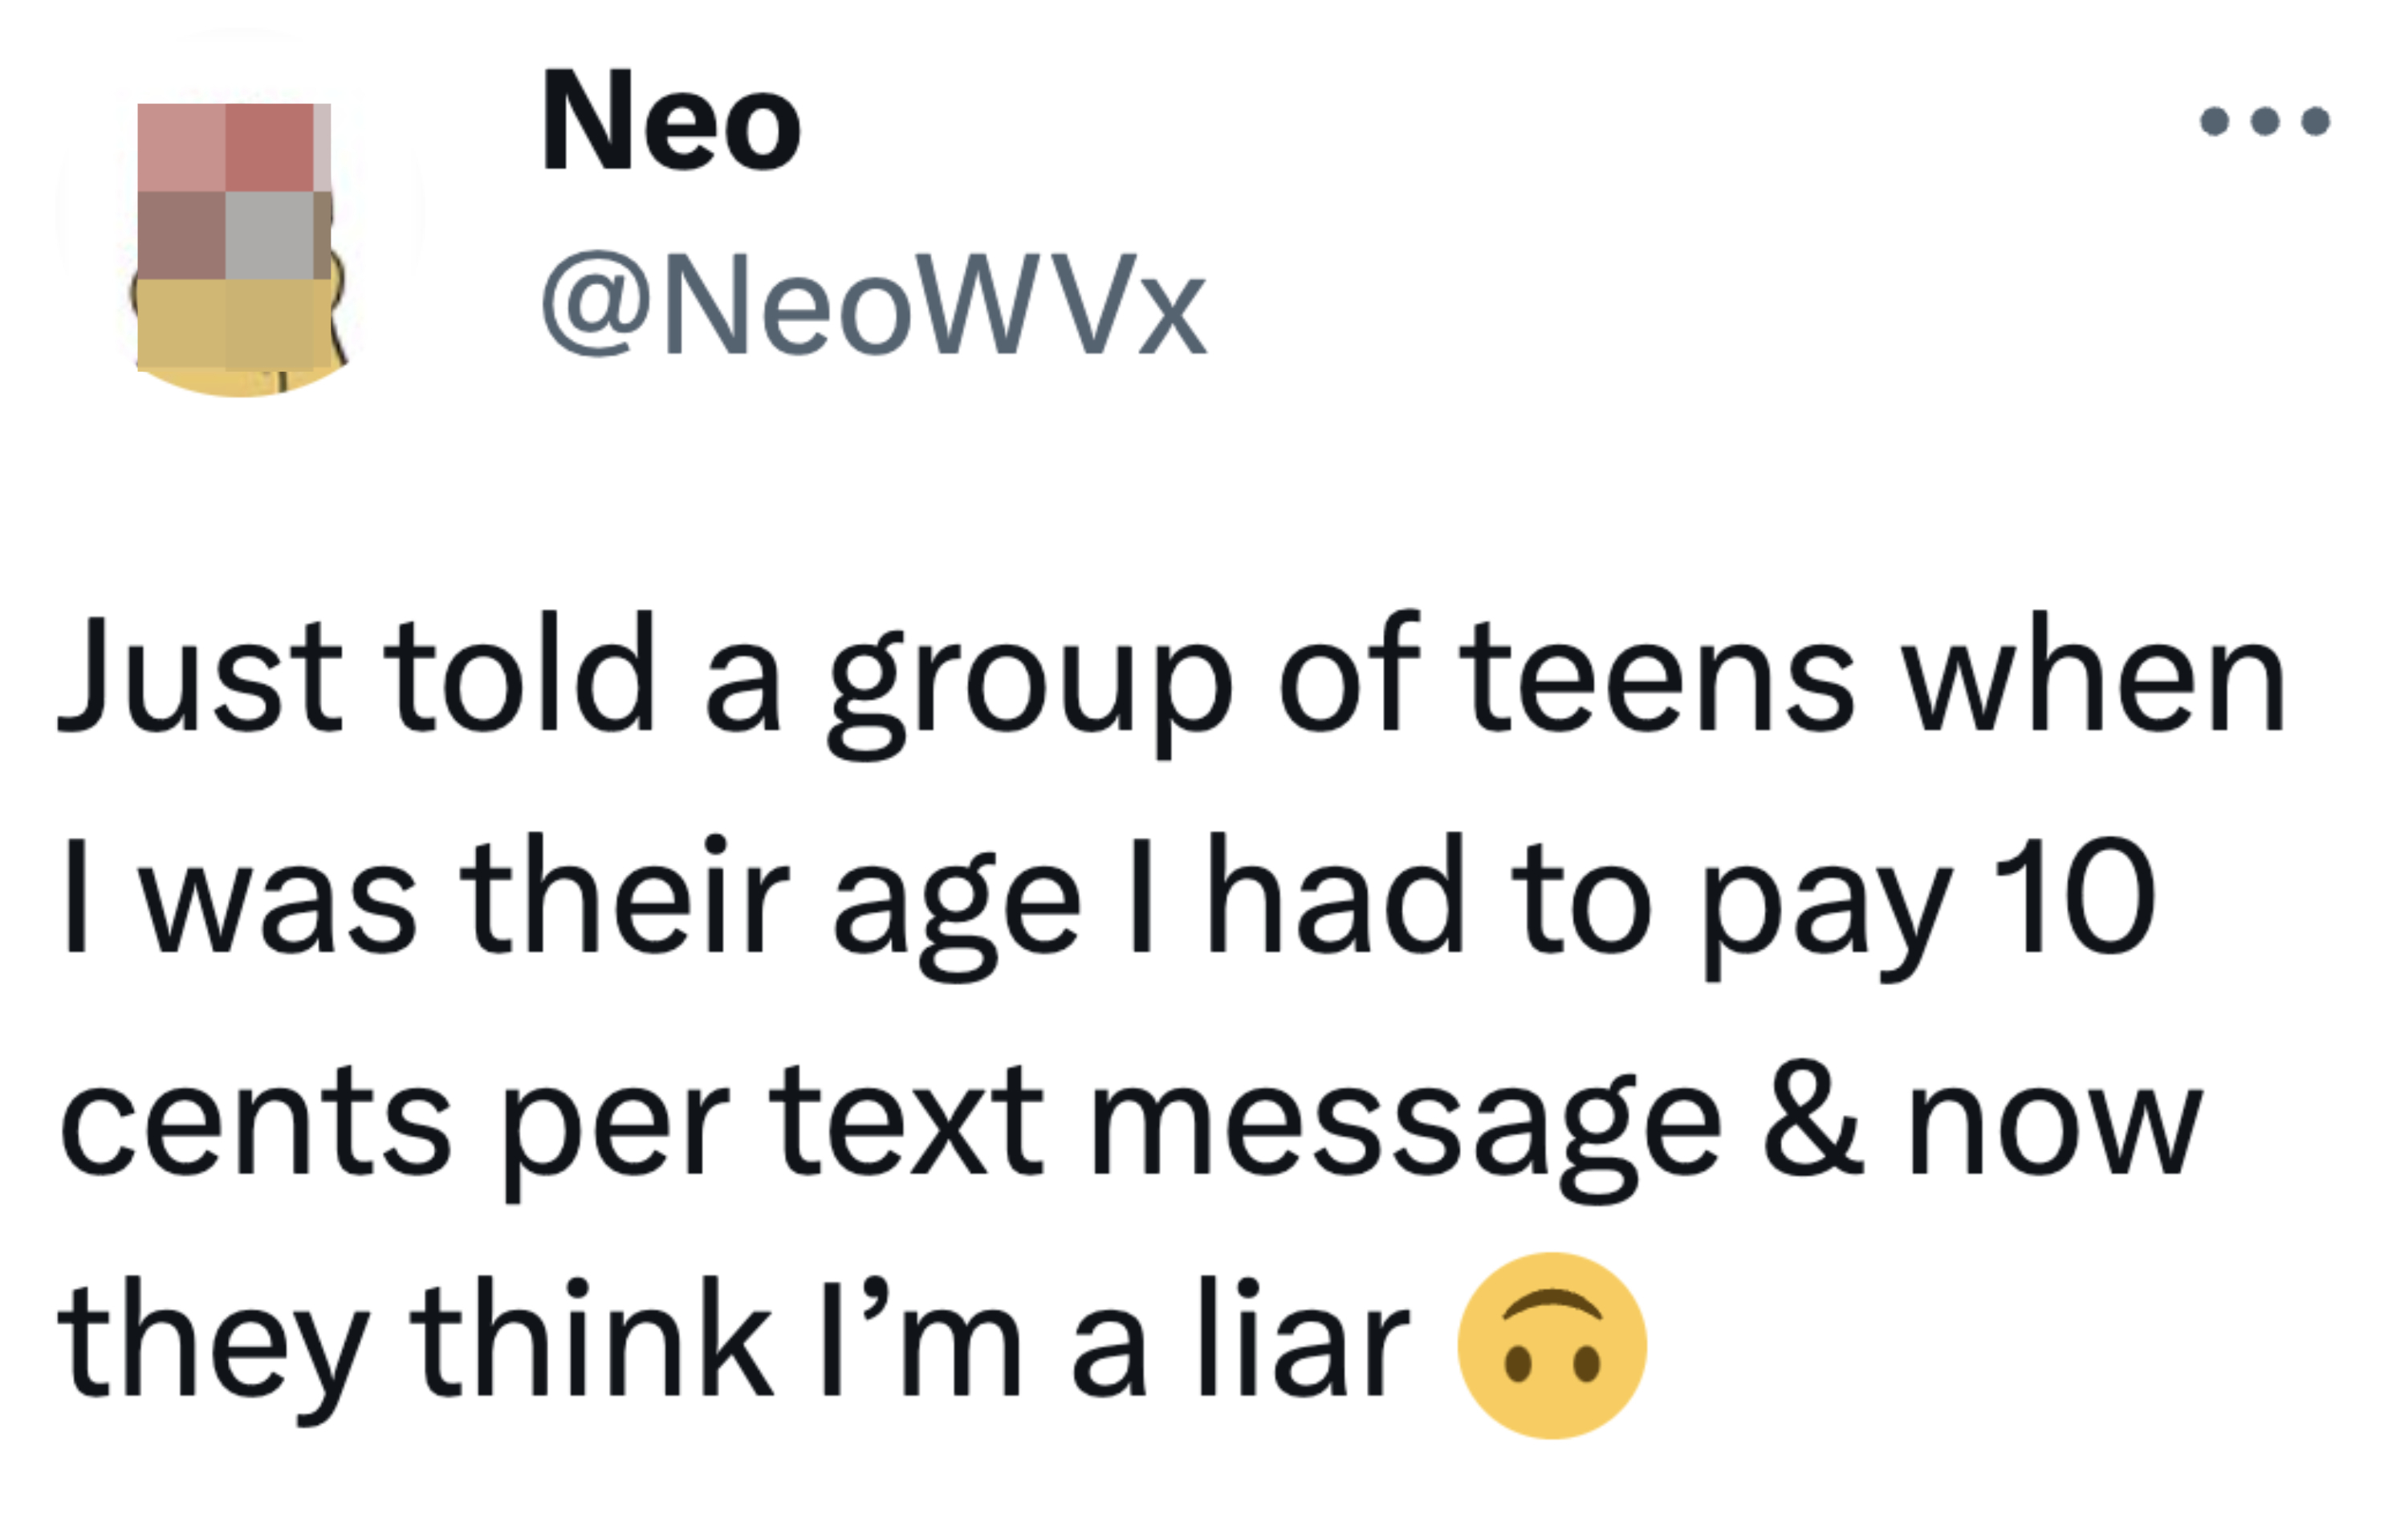 &quot;Just told a group of teens when I was their age I had to pay 10 cents per text message...&quot;